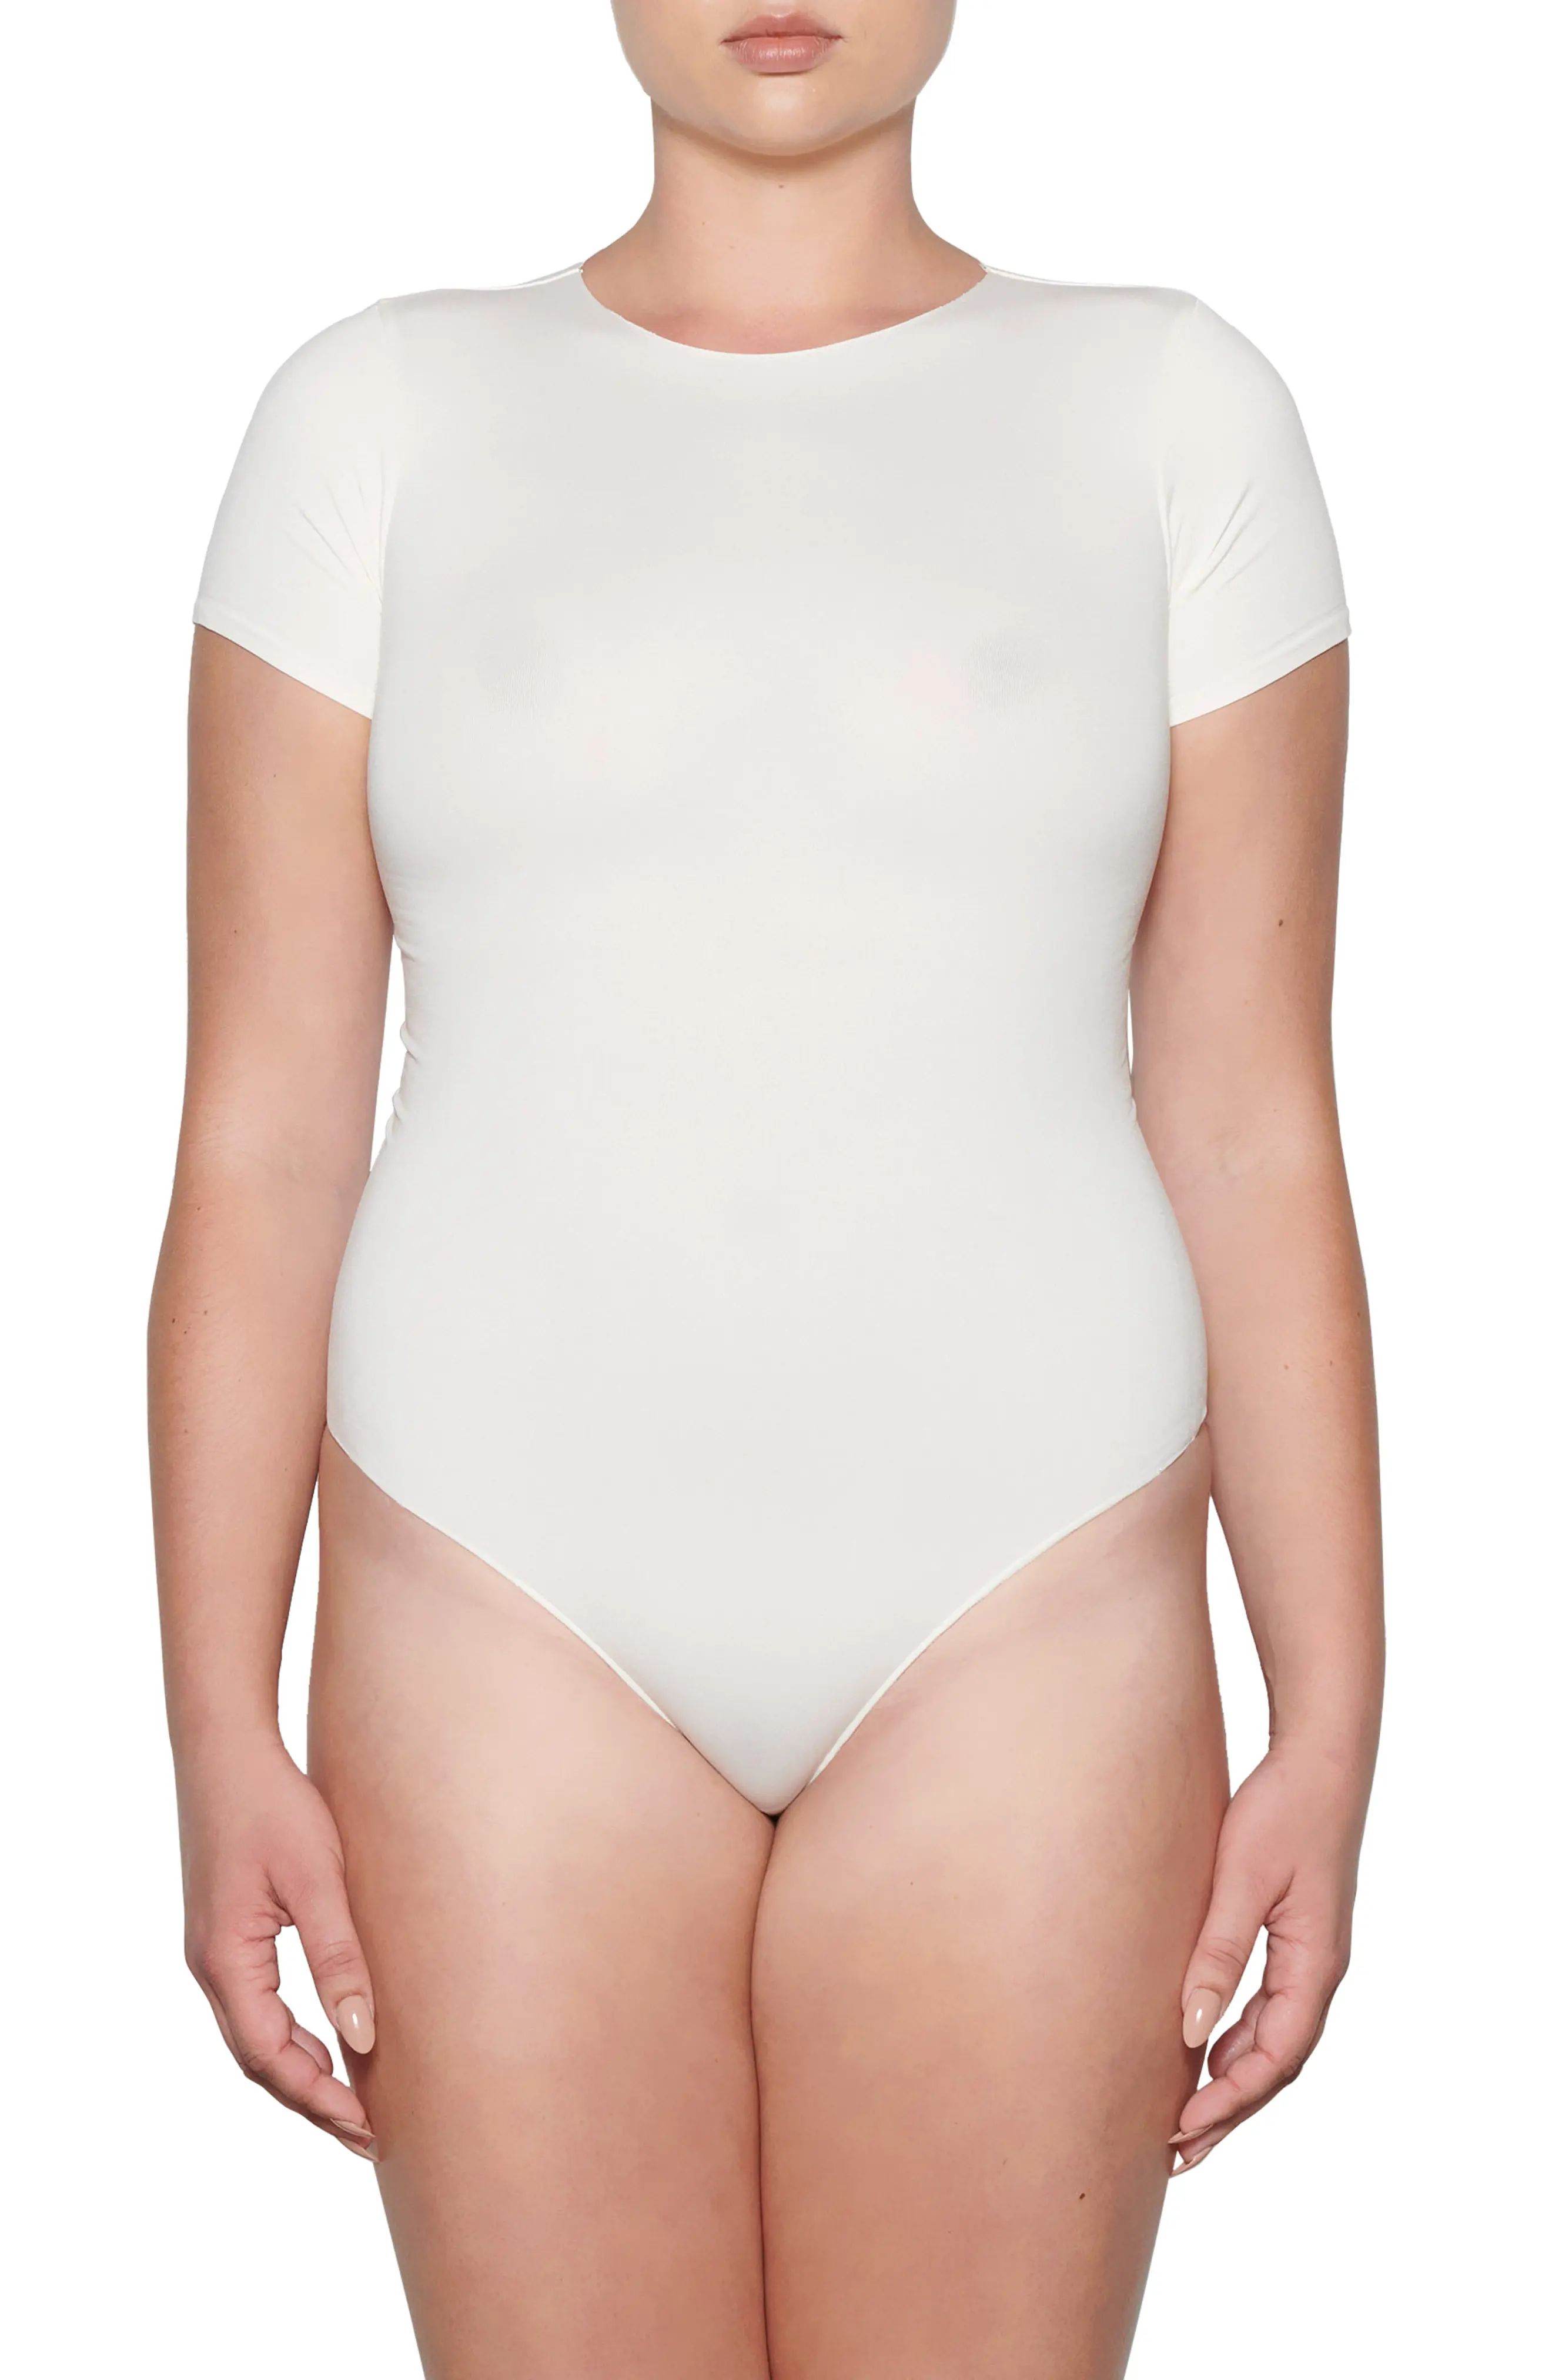 SKIMS Essential T-Shirt Thong Bodysuit in Marble at Nordstrom, Size 2X | Nordstrom